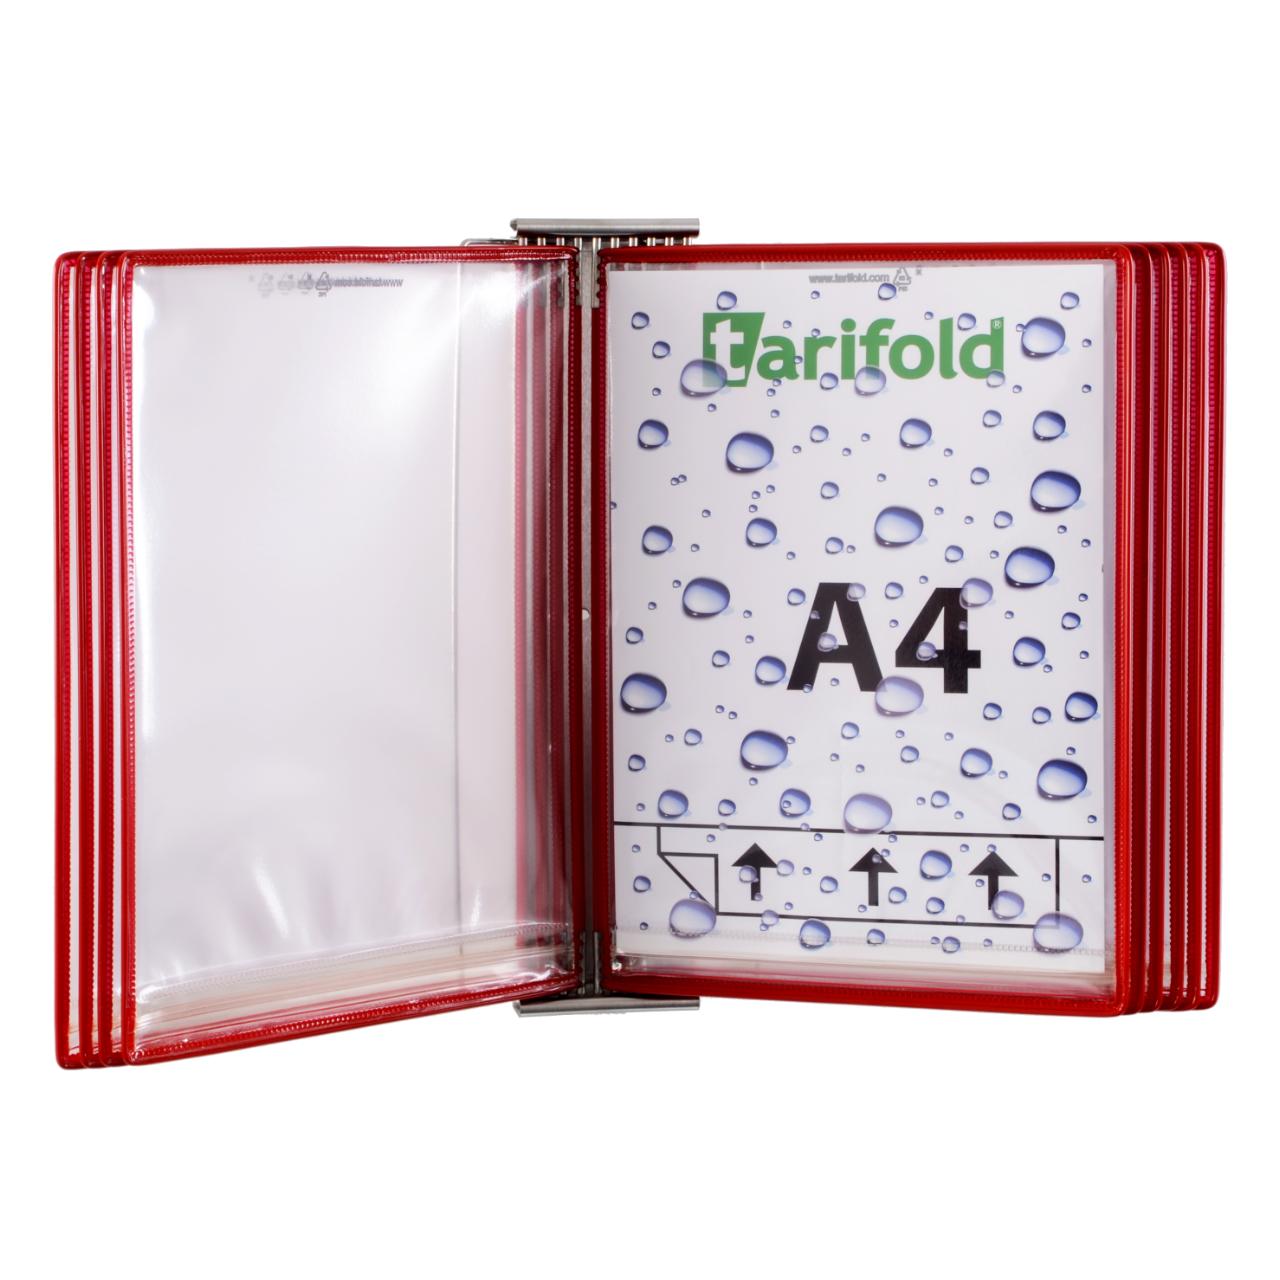 Tarifold Stainless Steel Wall Document Display System, A4, 10 Drypockets, Bottom Loading